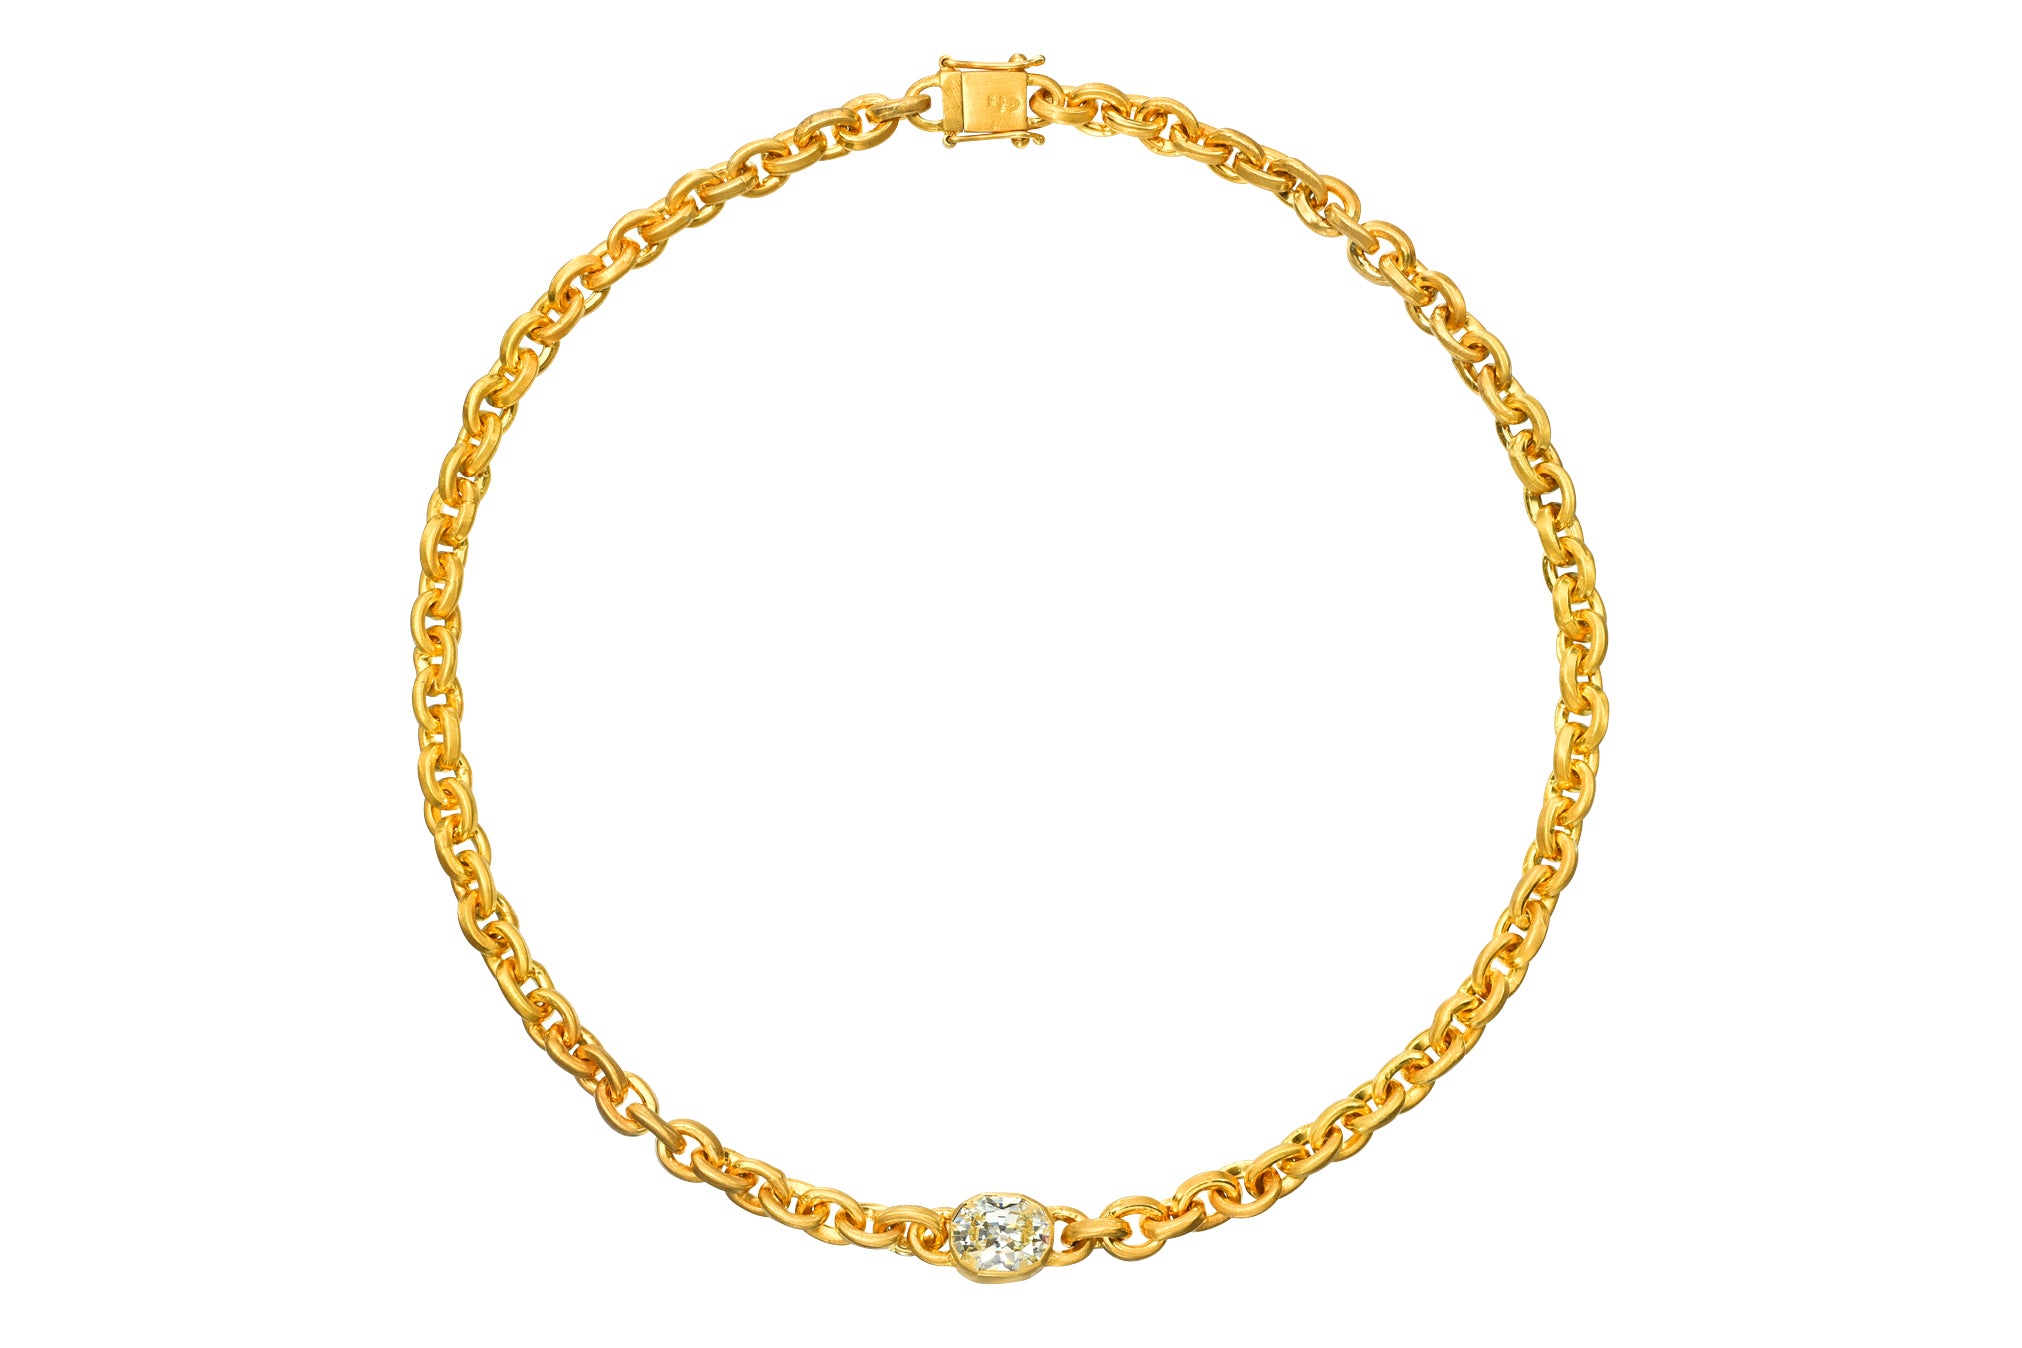 ONE OF A KIND OVAL YELLOW DIAMOND OVERSIZED SIGNATURE CHAIN